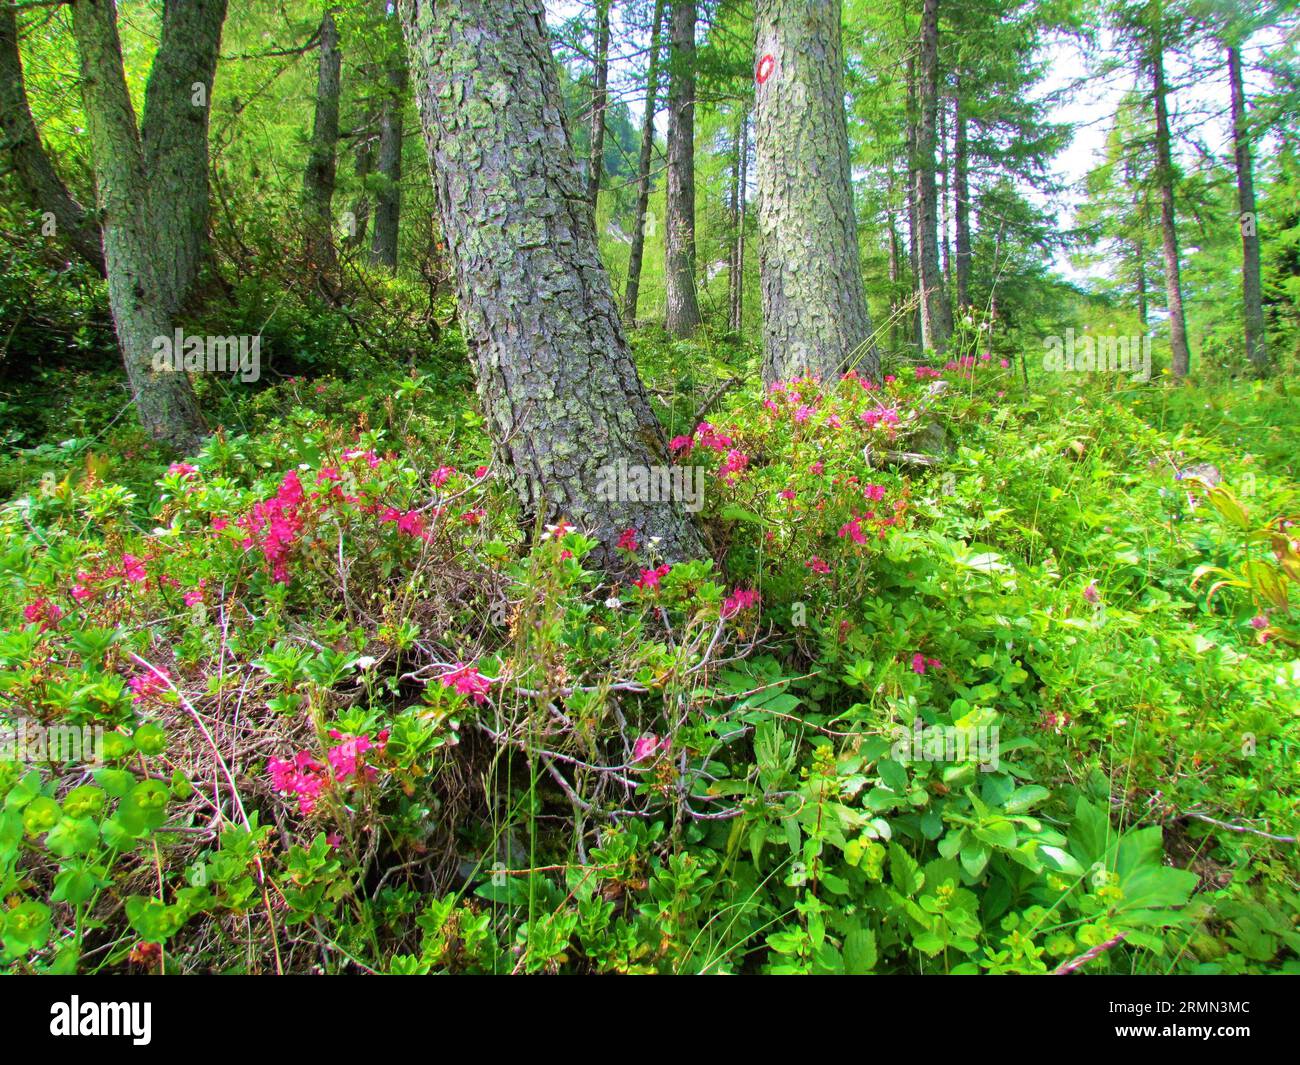 Pink flowering hairy alpen rose (Rhododendron hirsutum) growing in a bright larch forest in Slovenia Stock Photo